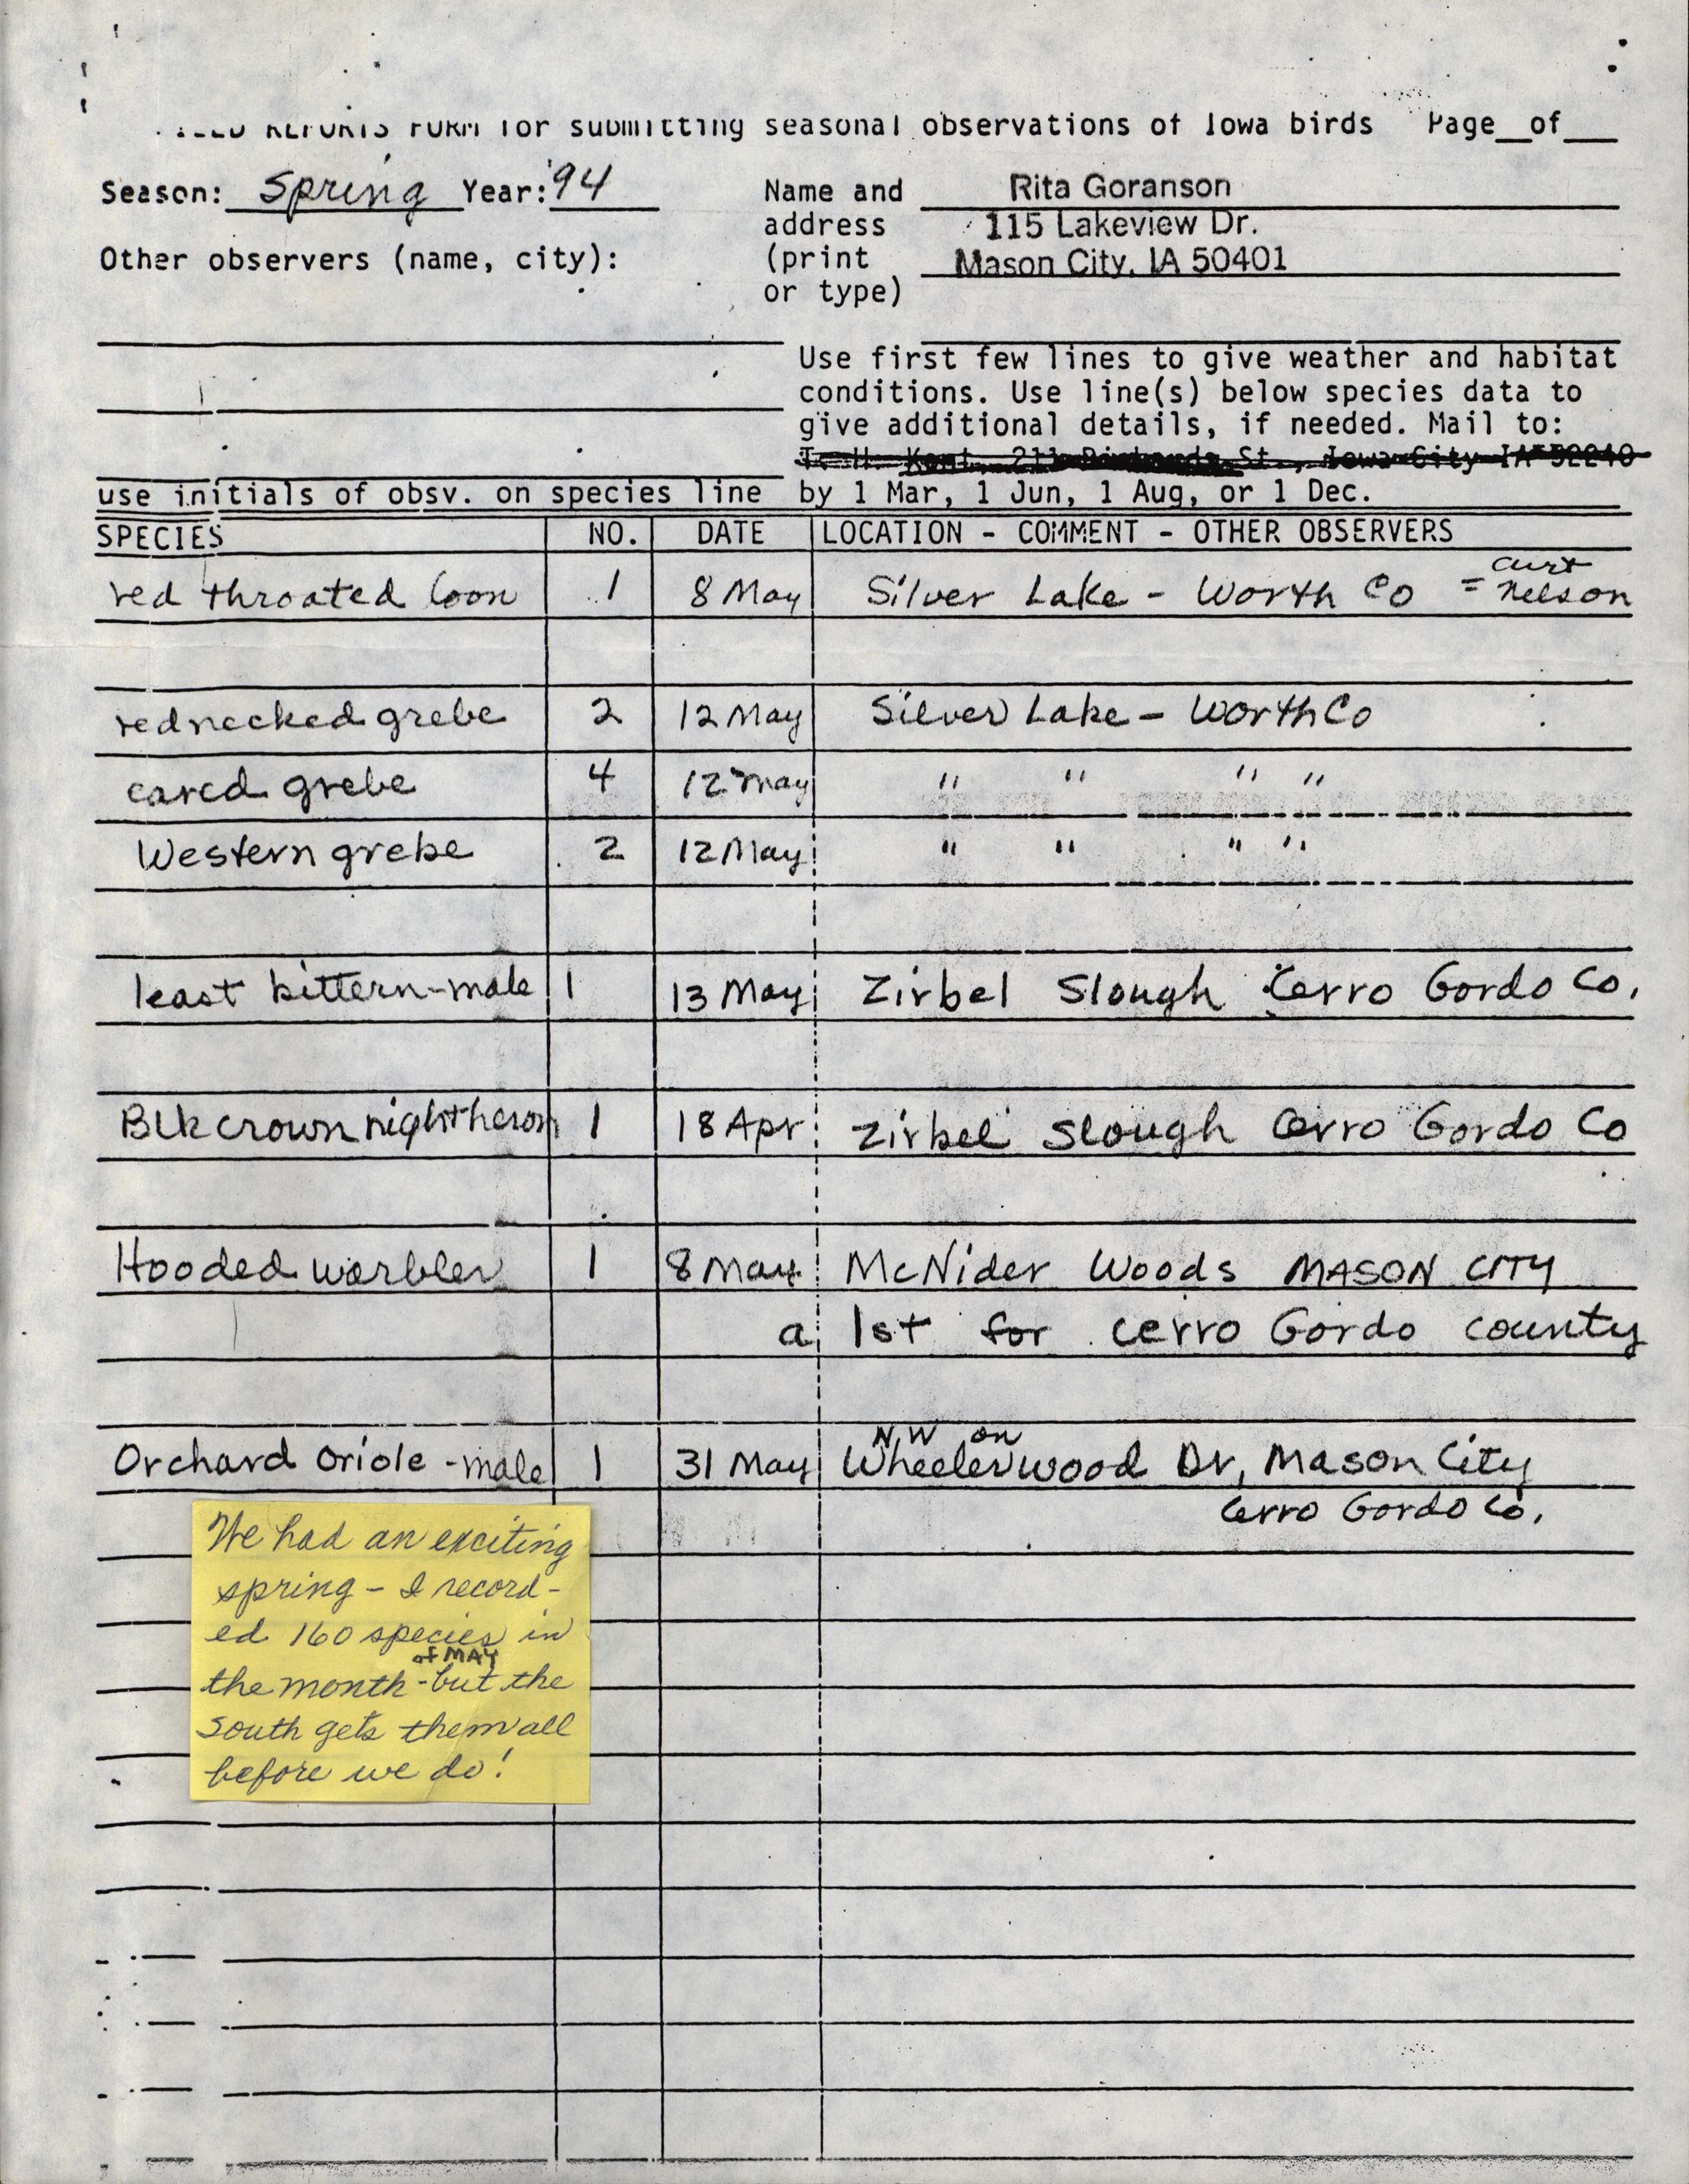 Field reports form for submitting seasonal observations of Iowa birds, Rita Goranson, Spring 1994